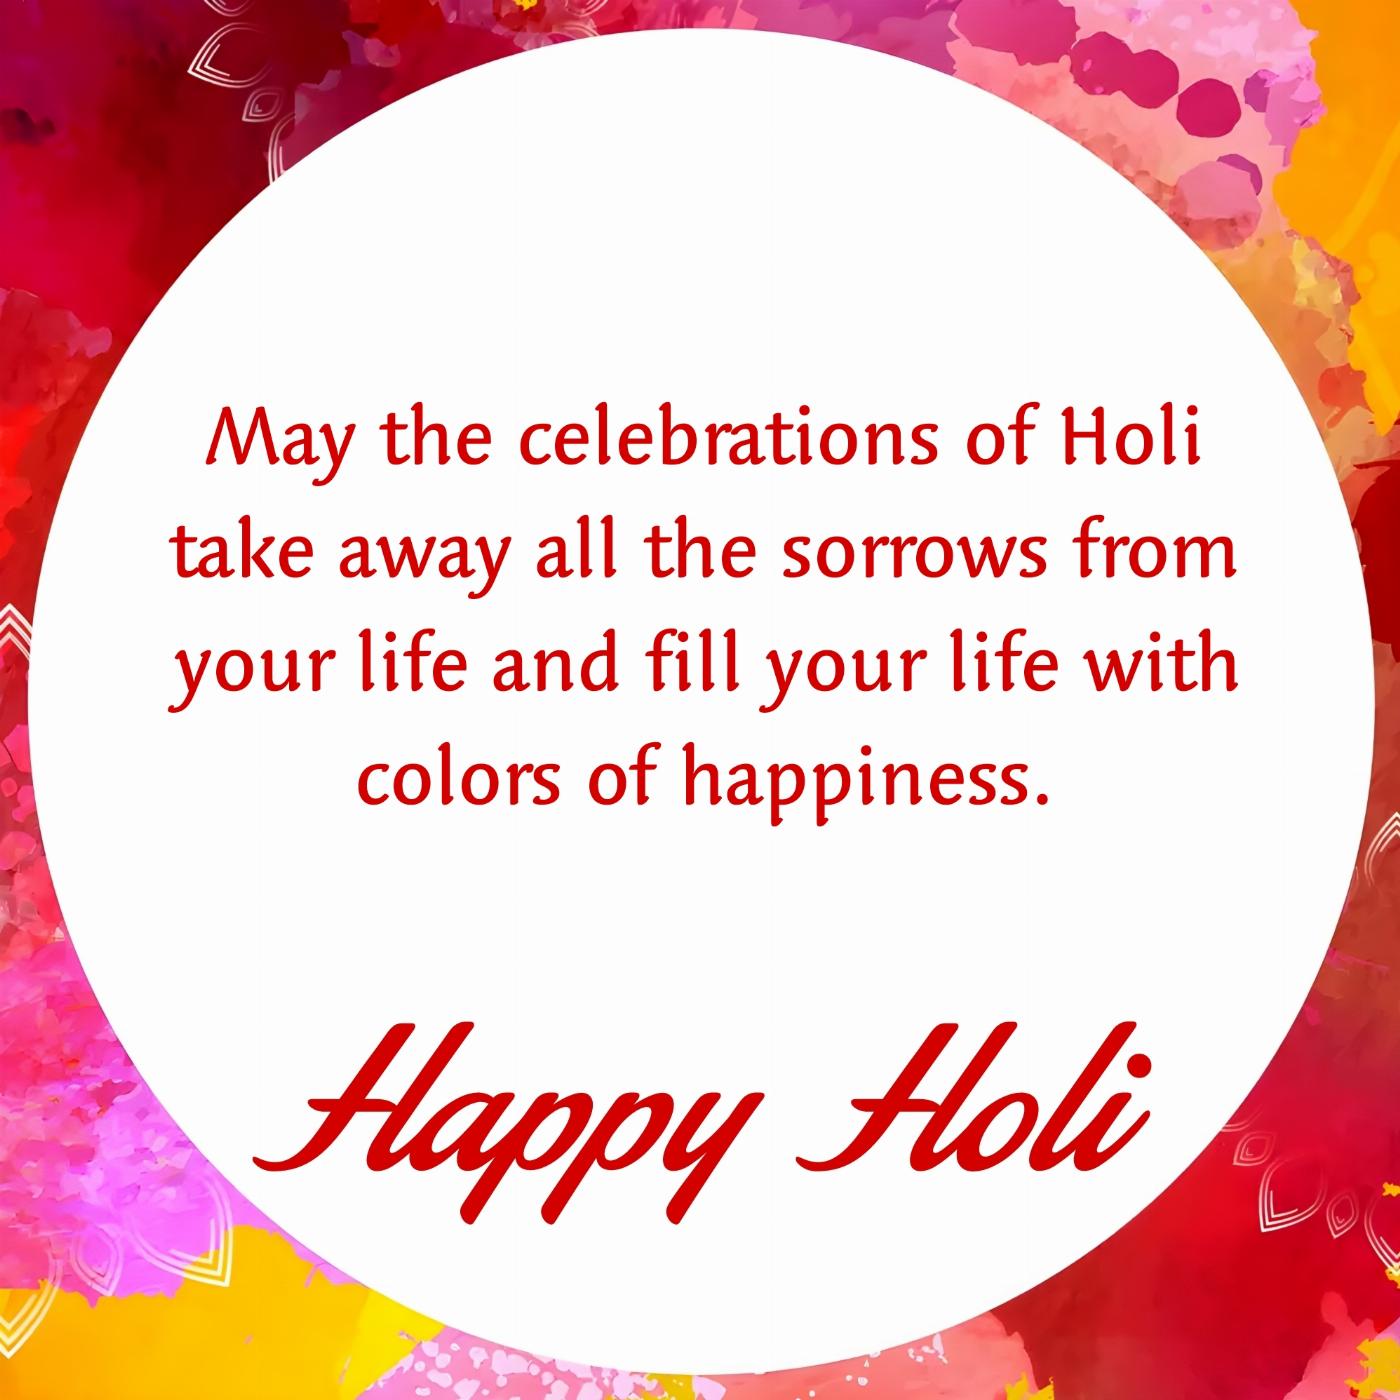 May the celebrations of Holi take away all the sorrows from your life